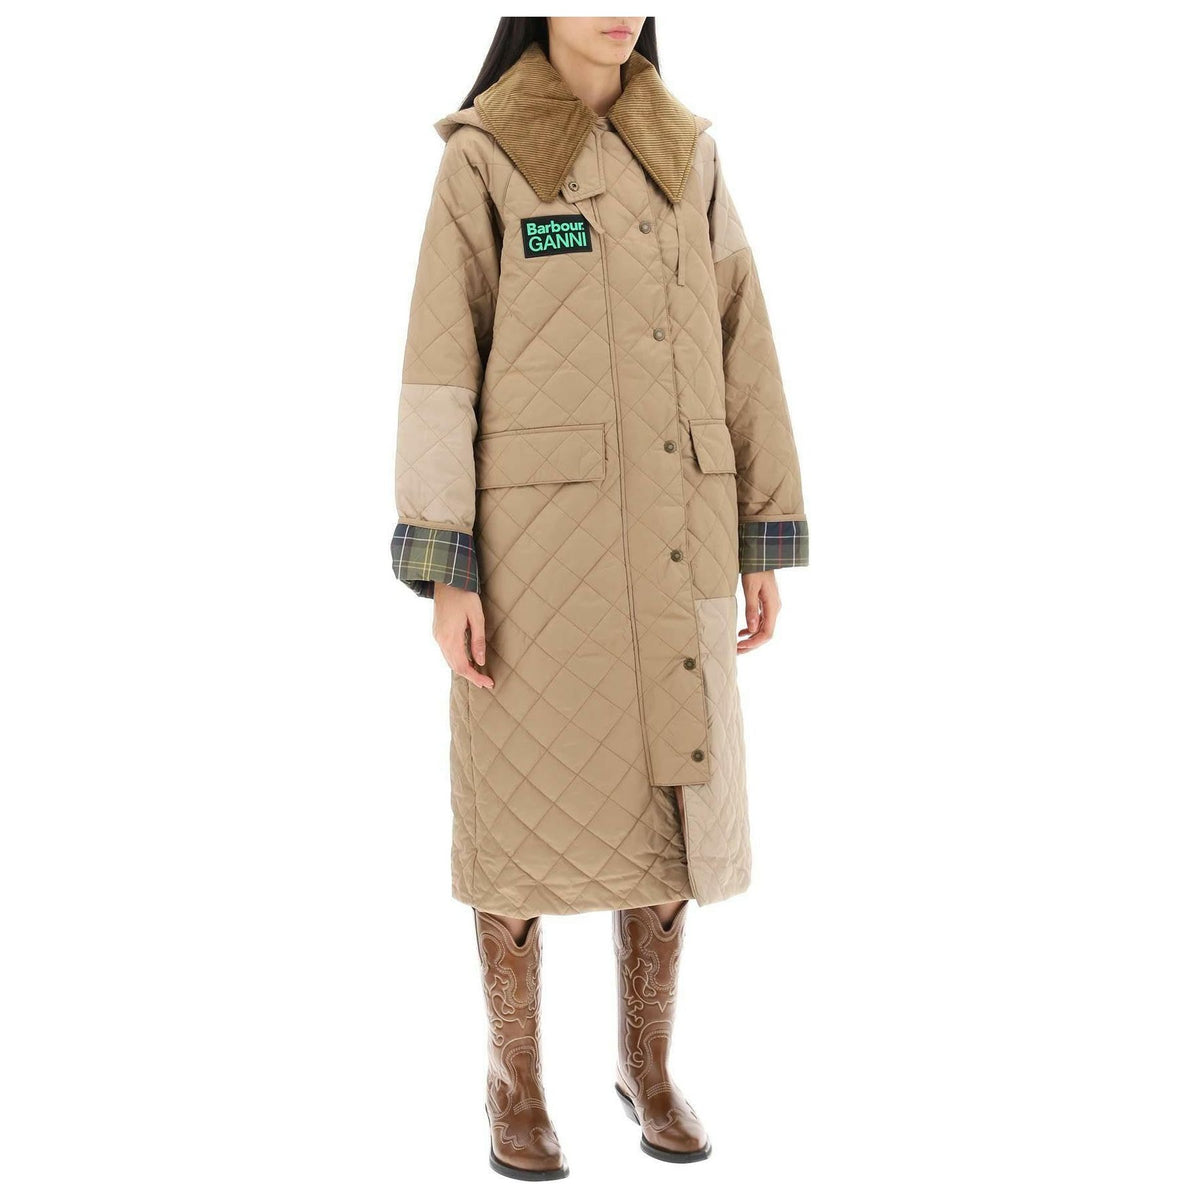 Barbour X Ganni Burghley Quilted Trench Coat - JOHN JULIA